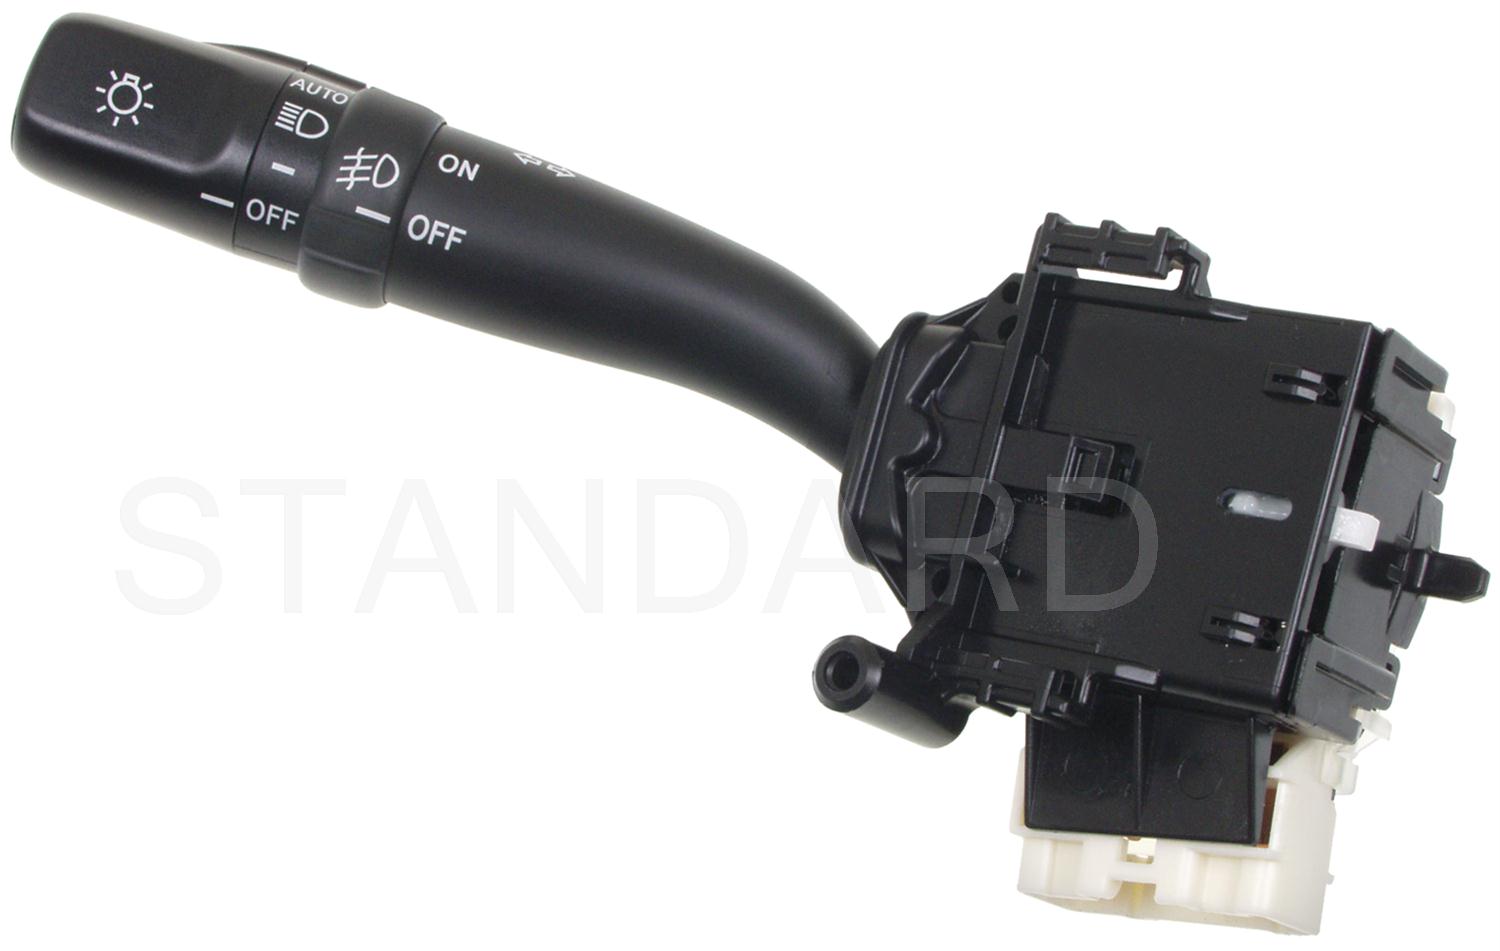 Picture of Standard Motor Products CBS1174 Standard Motor Products Cbs-1174 Combination Switch